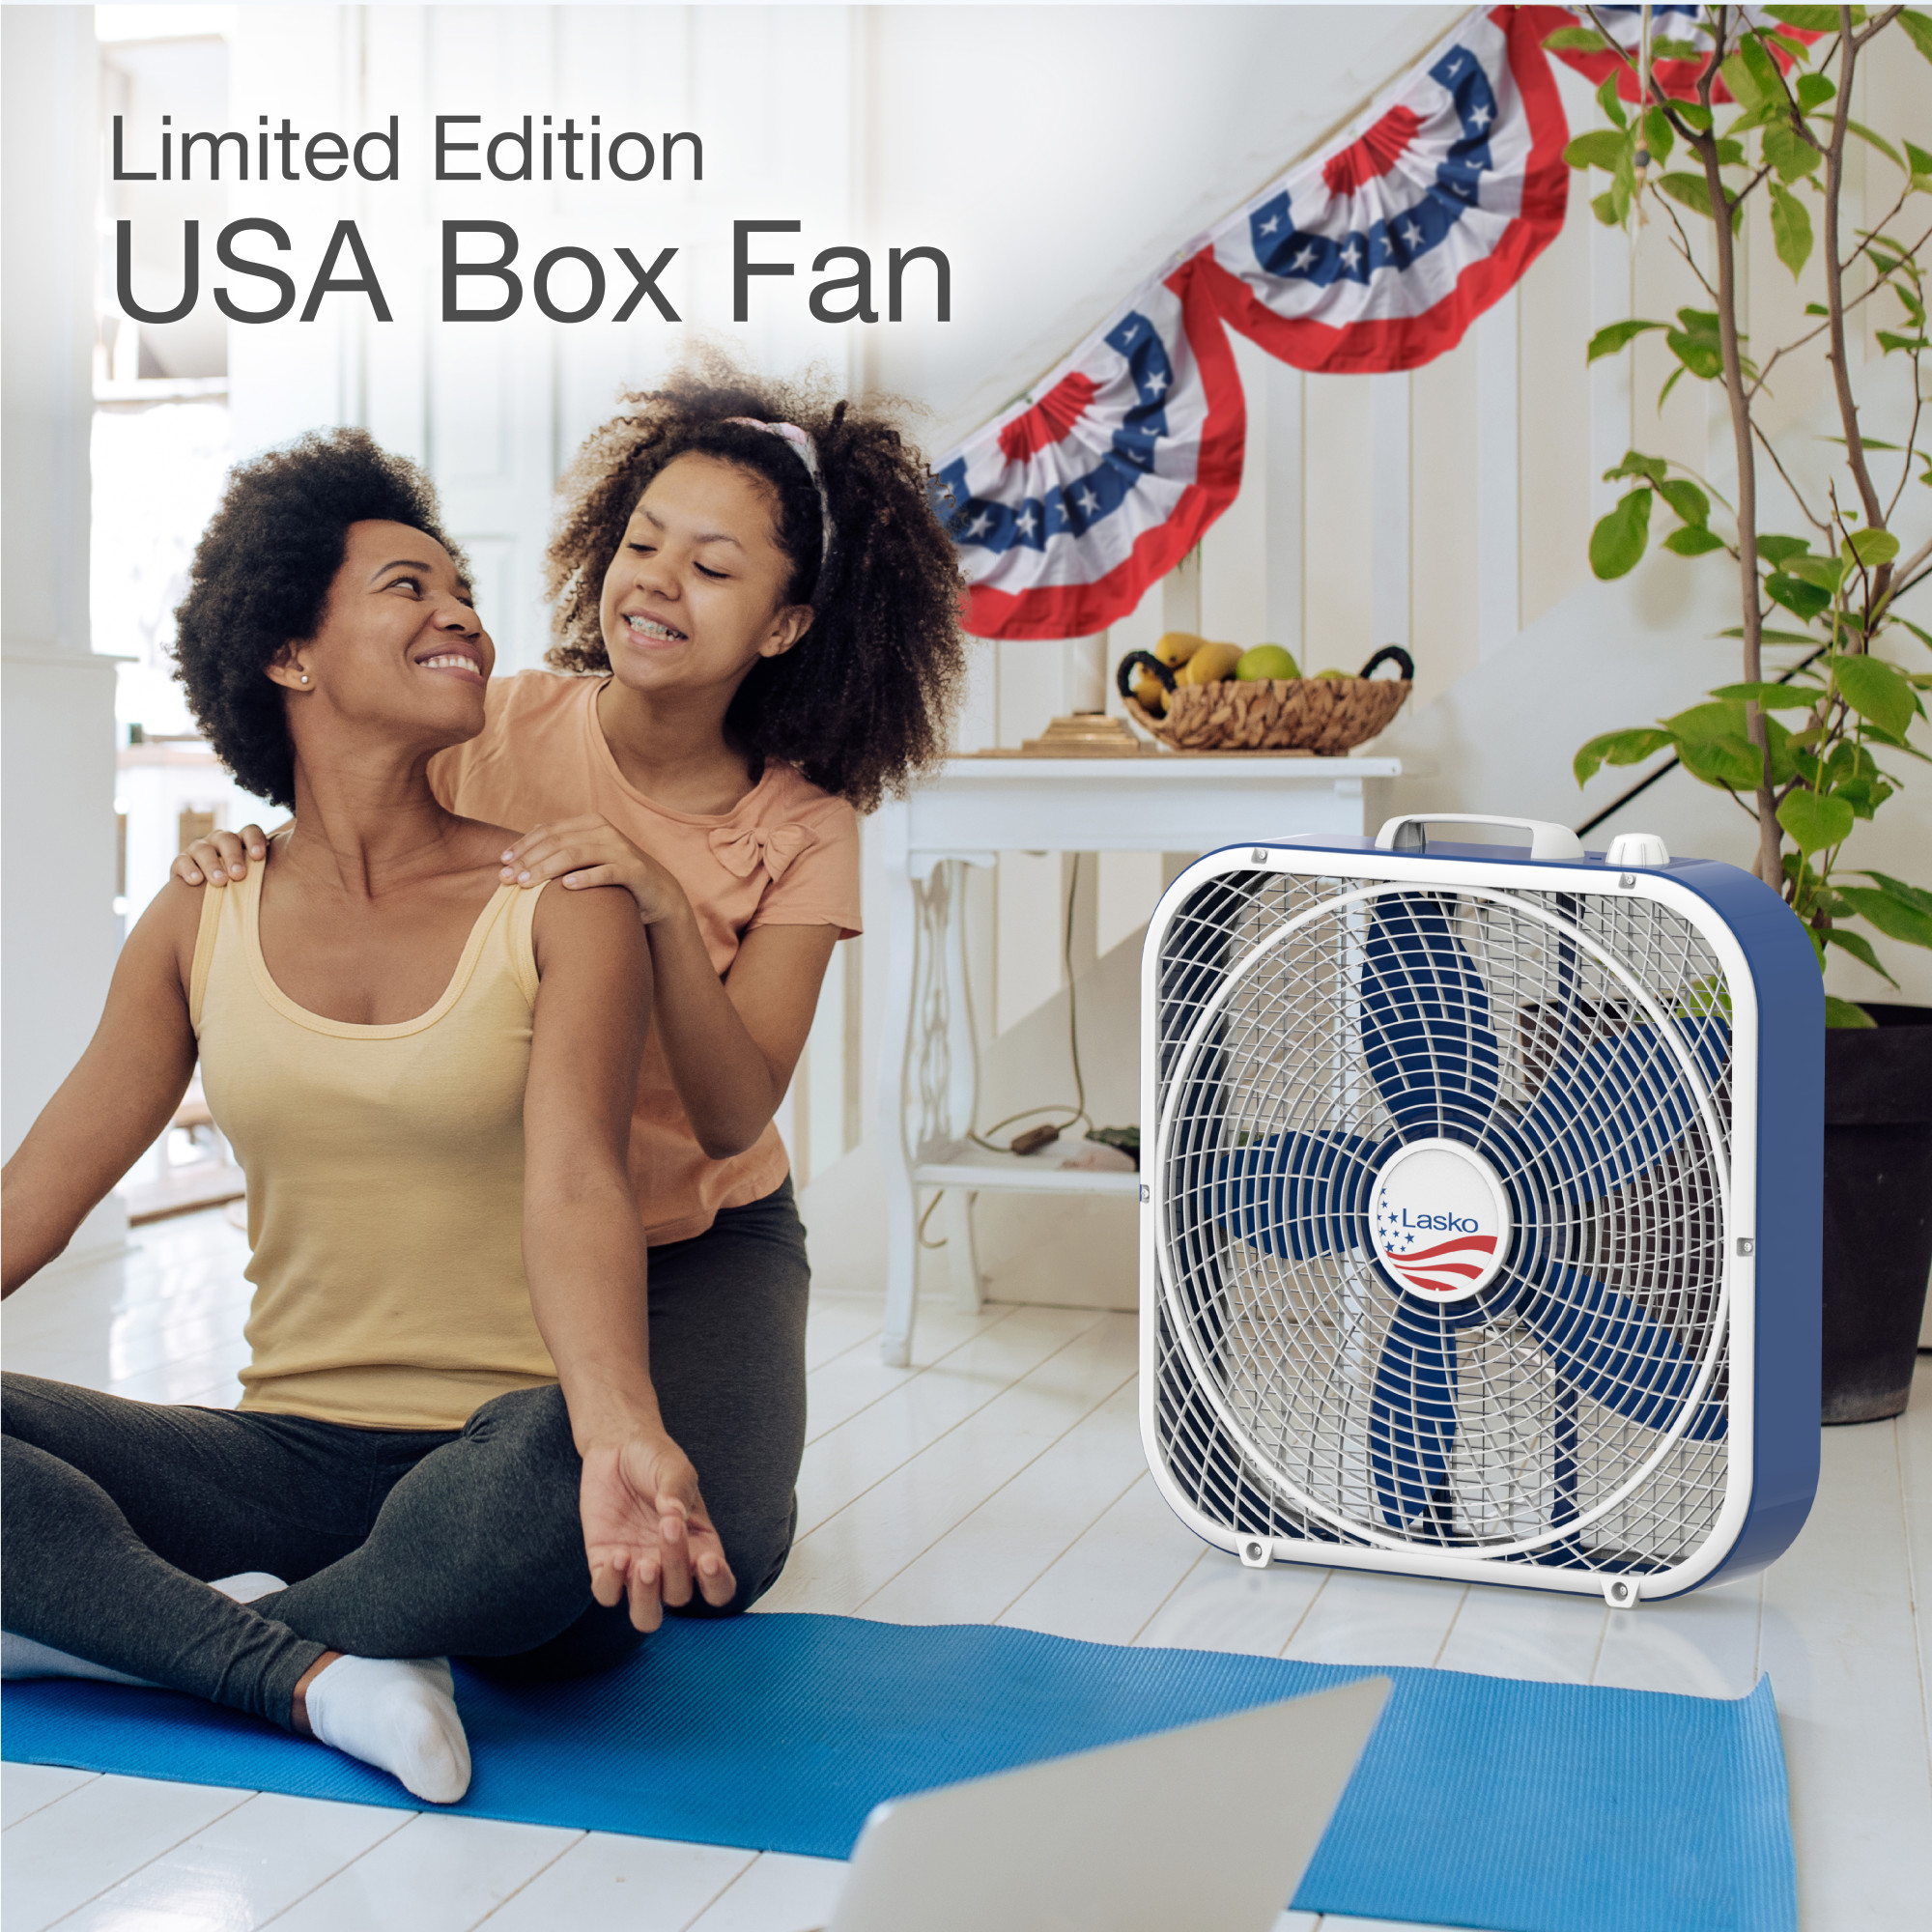 Lasko 20" Limited Edition Box Fan with 3 Speeds, 22.5" High, Red, White & Blue, B20610, New - image 3 of 11